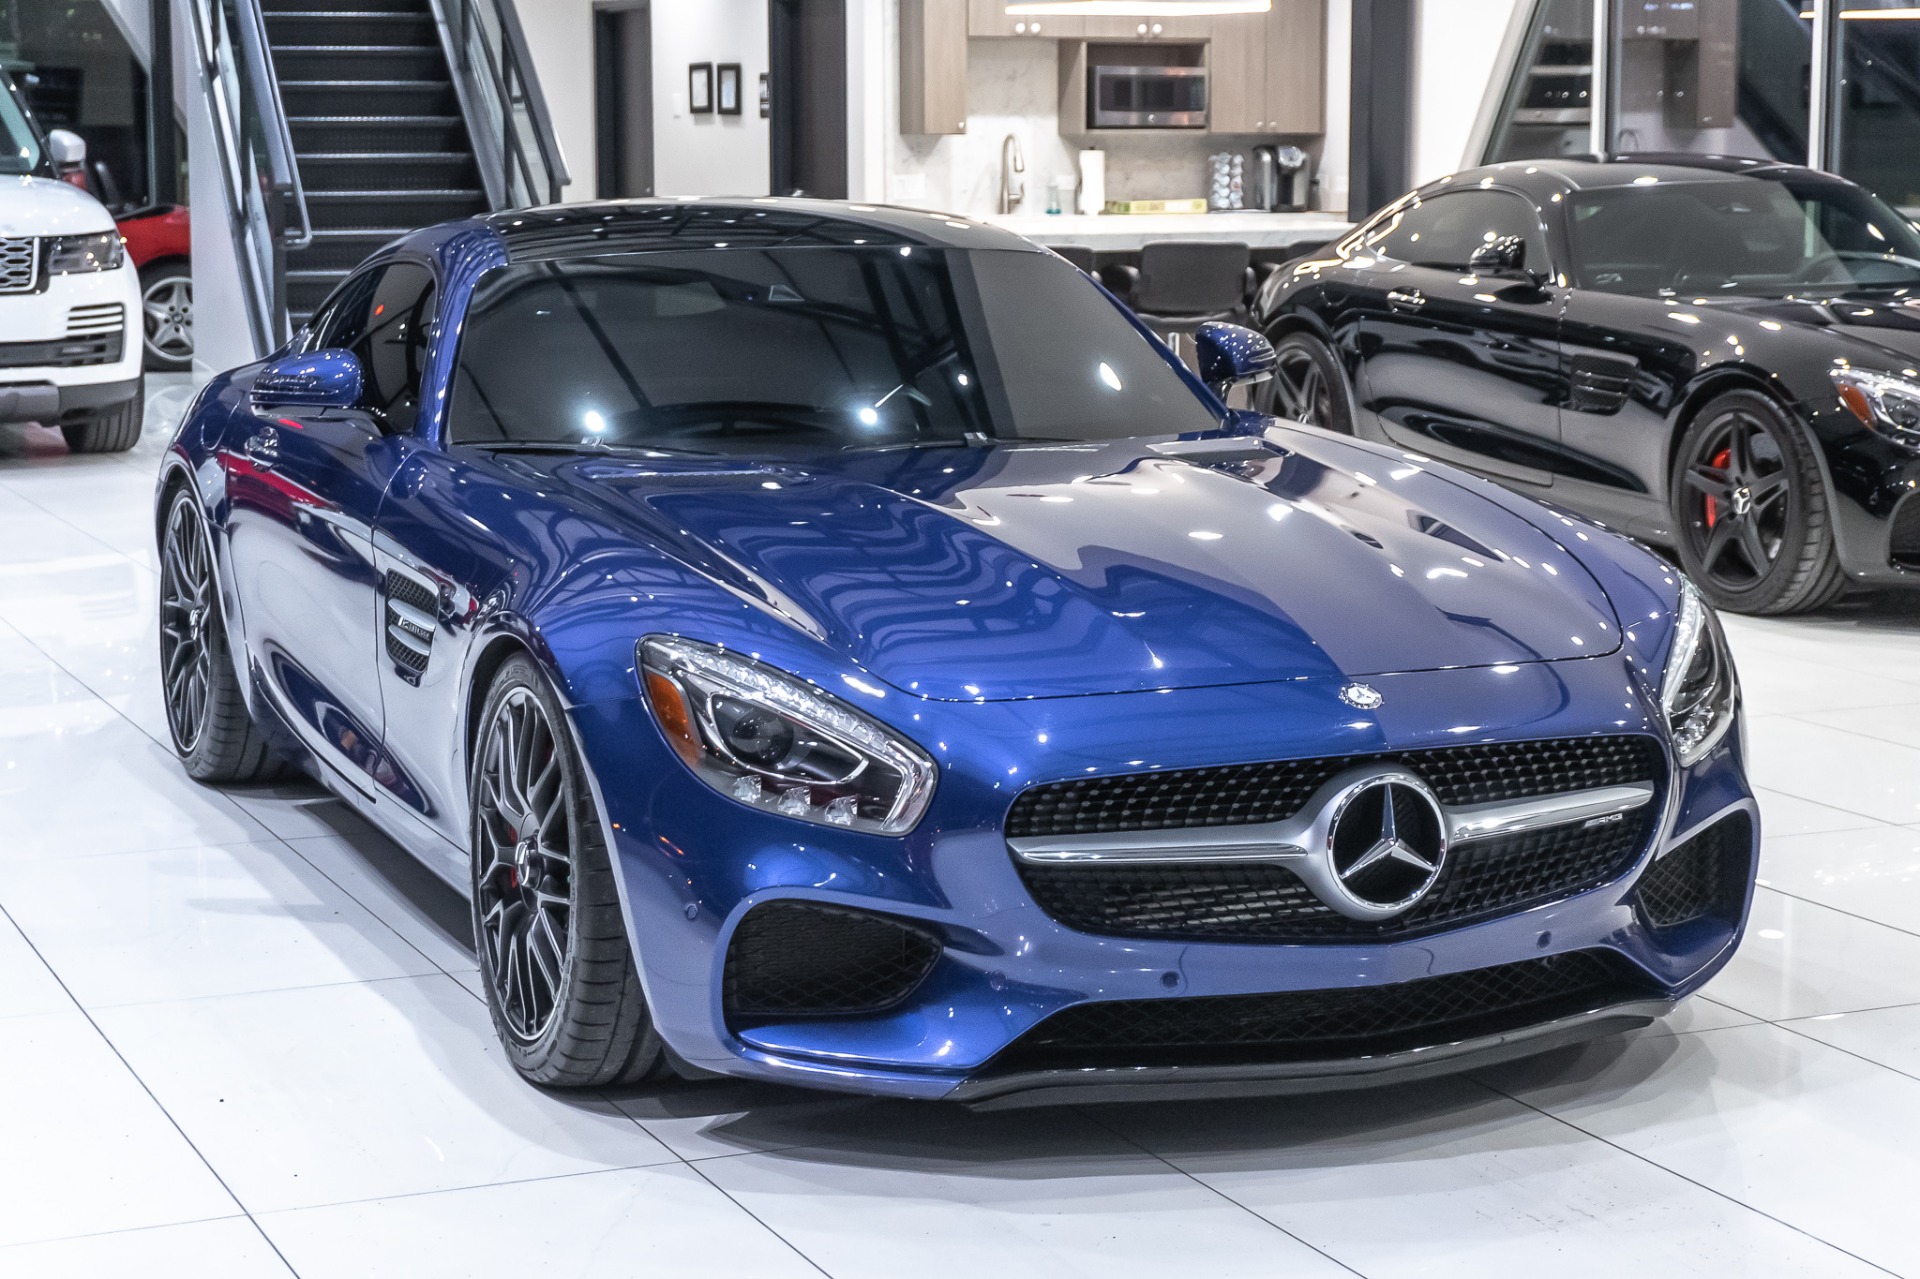 Used-2017-Mercedes-Benz-AMG-GTS-Coupe-Dynamic-Plus-Pkg-TunedDownpipes-563-WHP